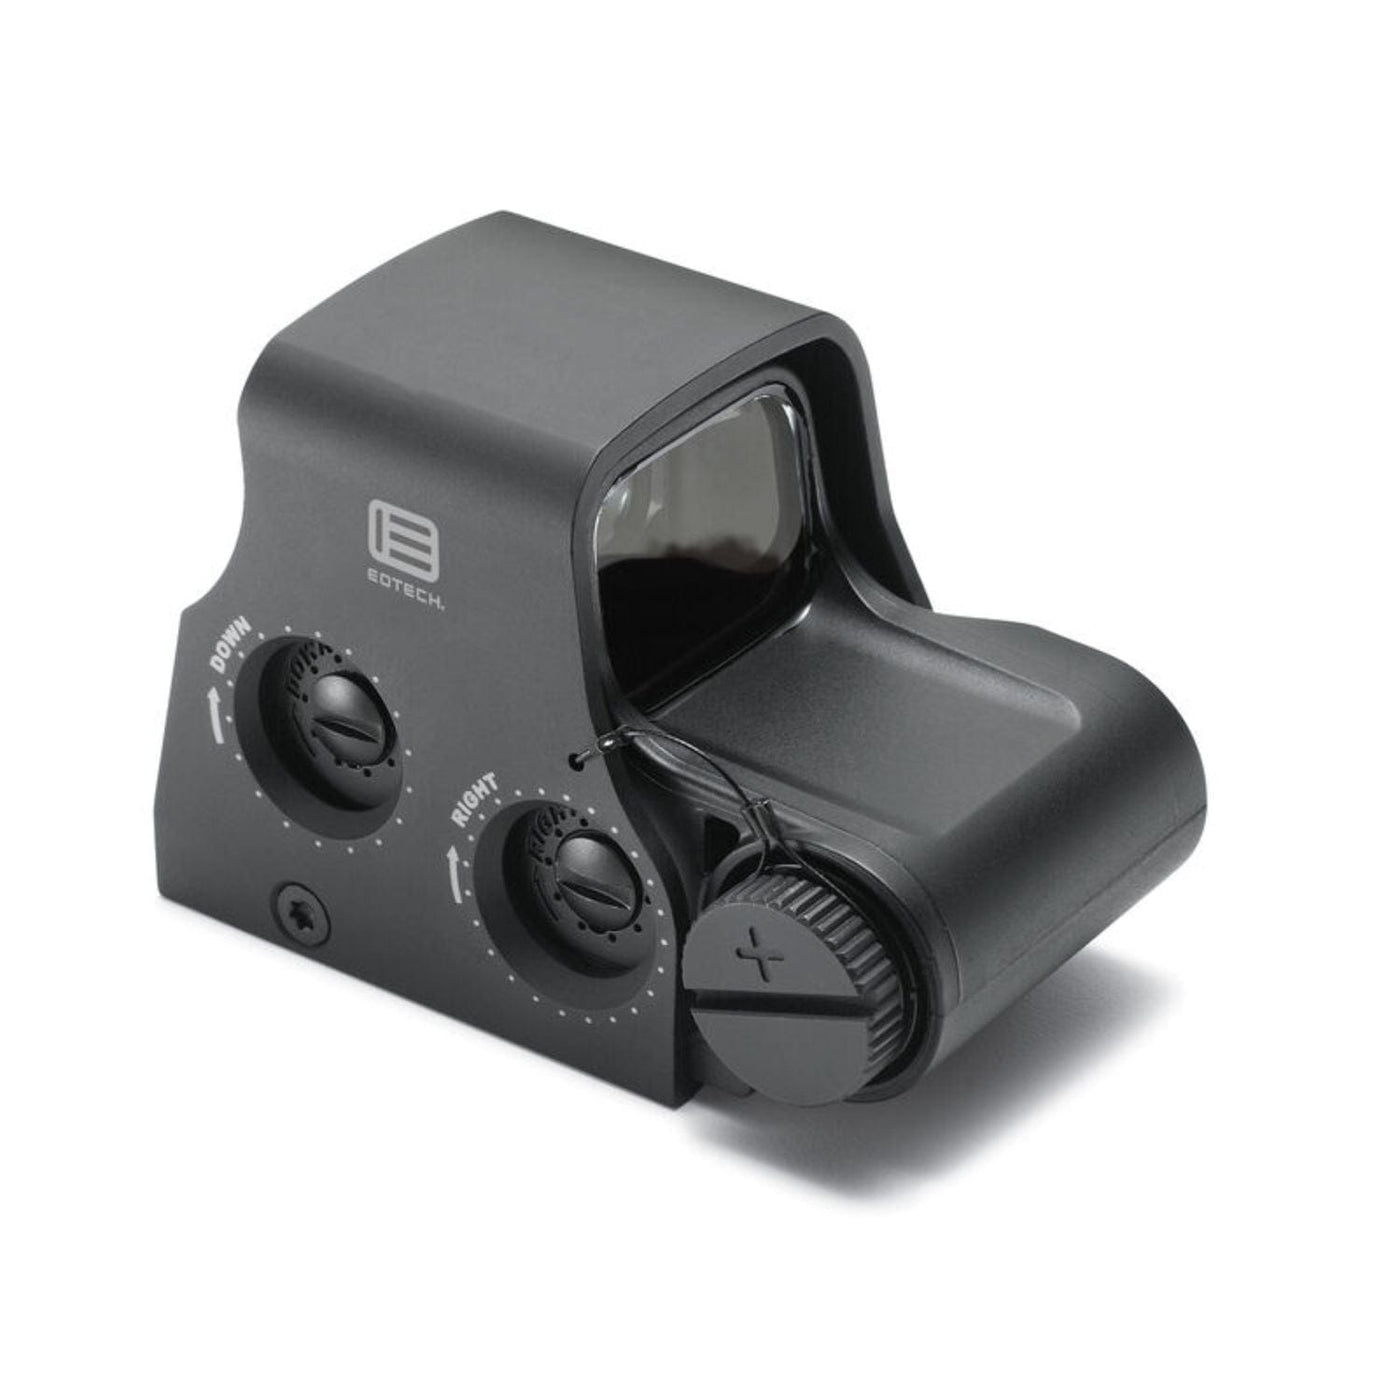 EOTECH EOTECH XPS2-0GRN Holographic Weapon Sight Optics And Sights